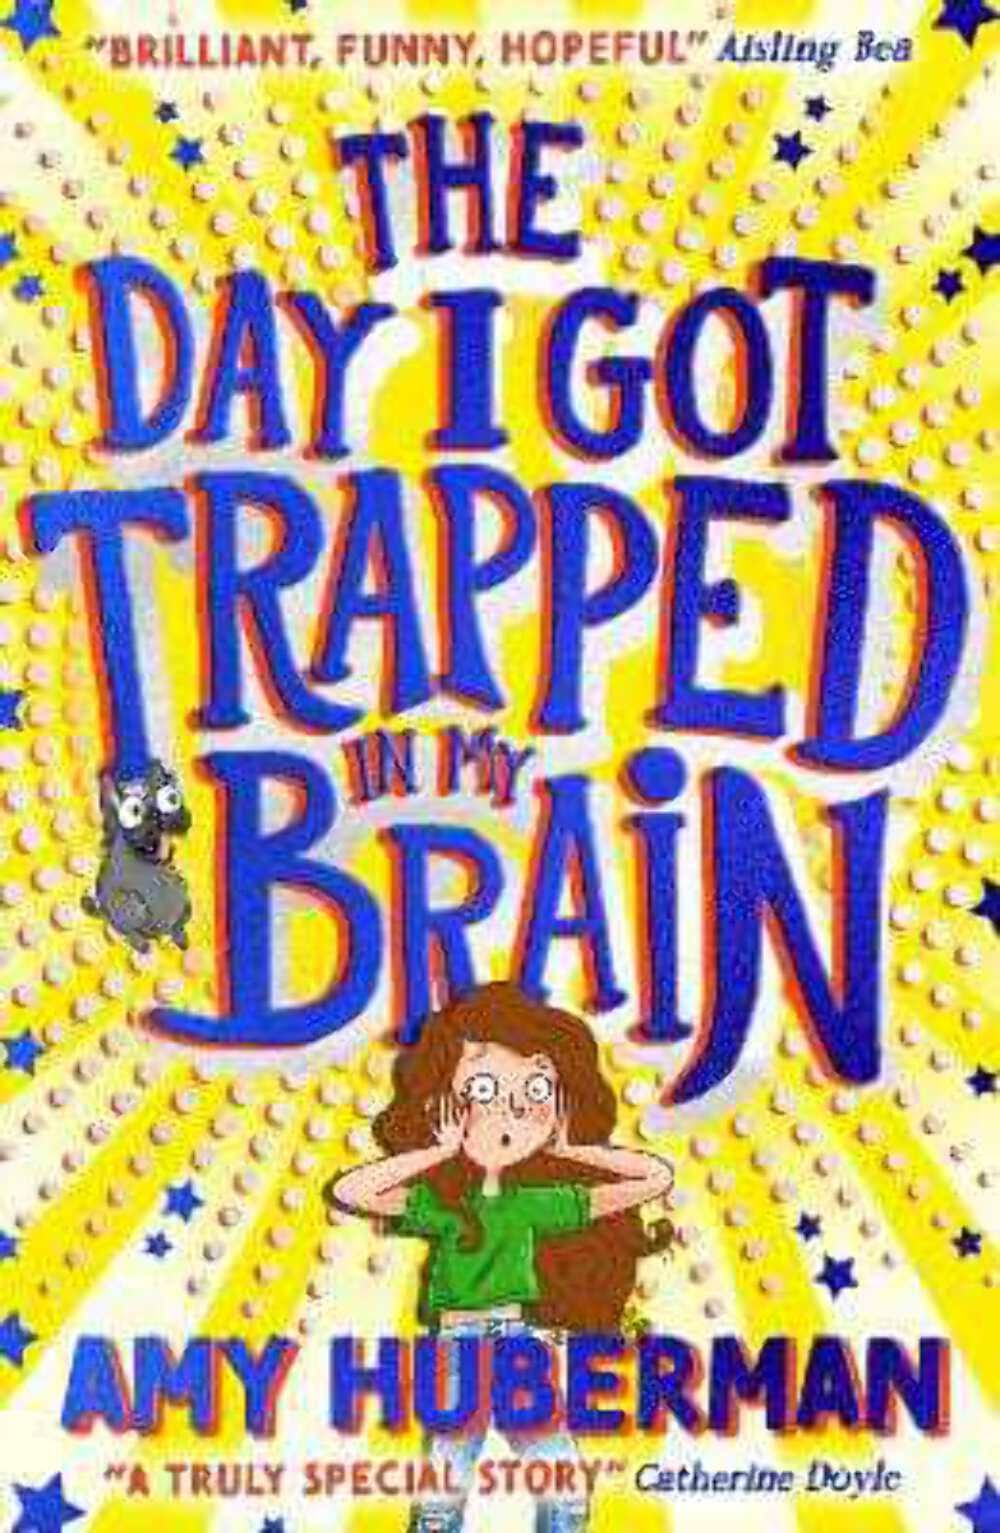 The Day I Got Trapped In My Brain by Amy Huberman